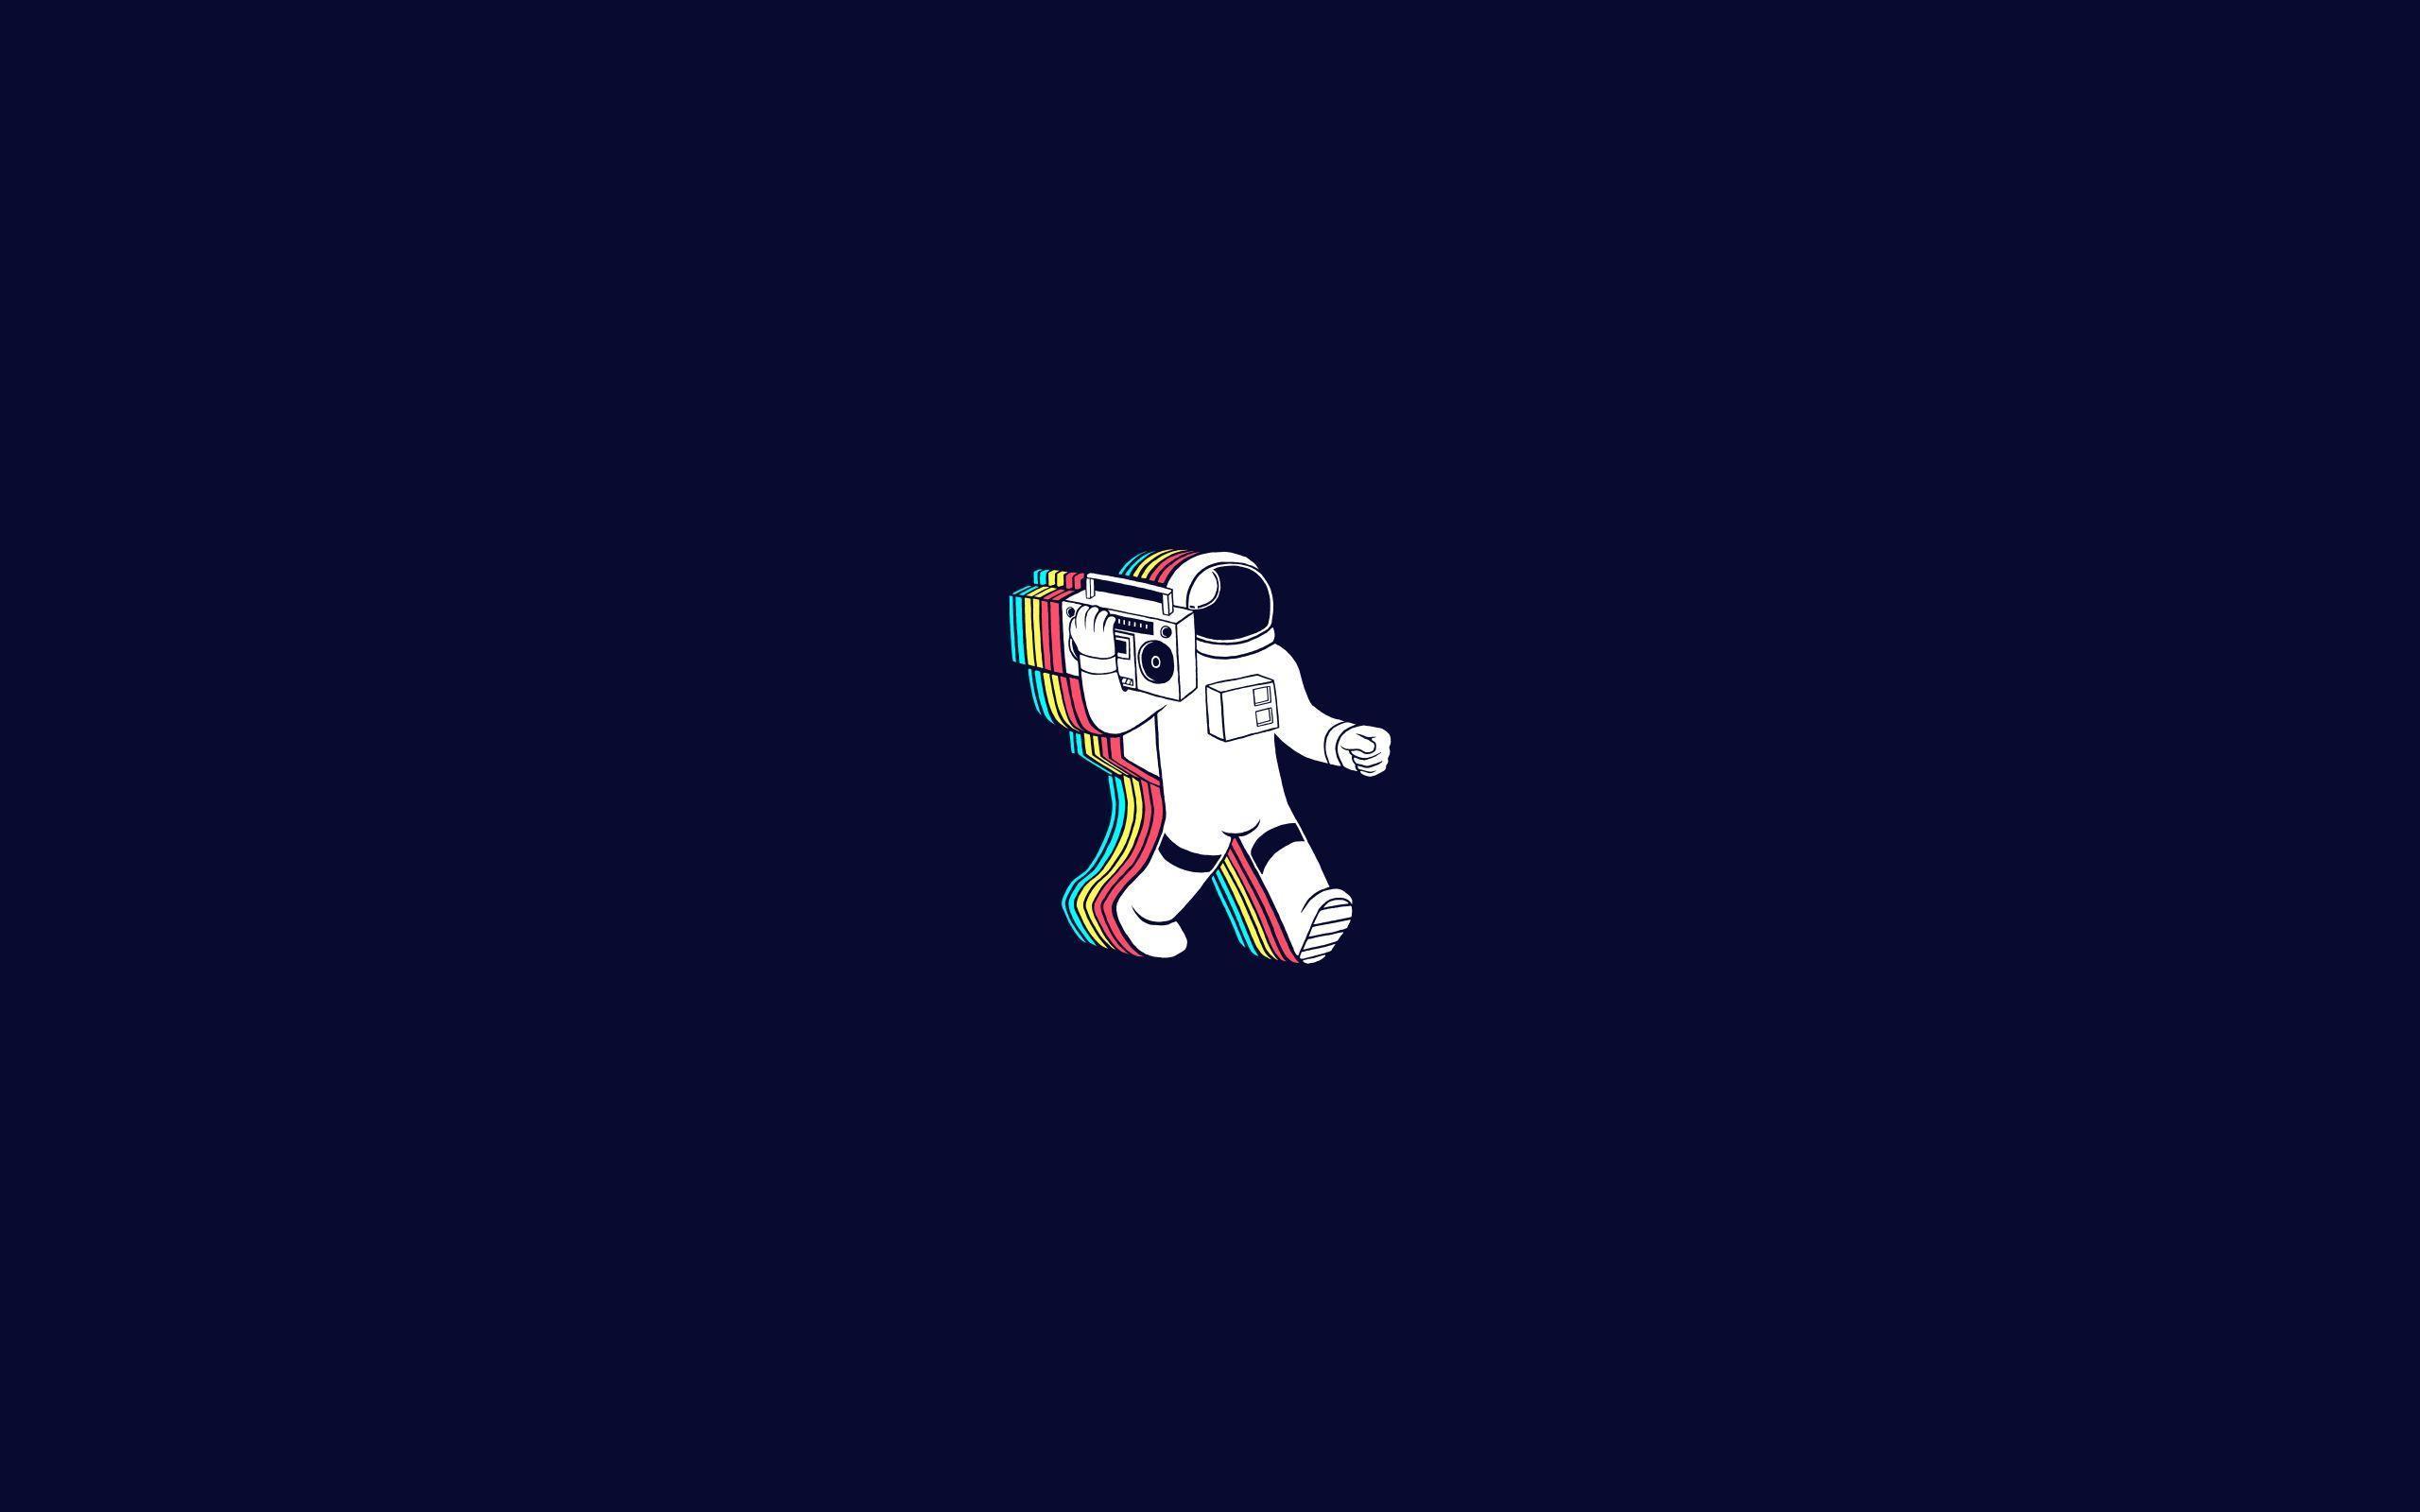 Spaceman Wallpaper, Spaceman Photo for Windows and Mac Systems